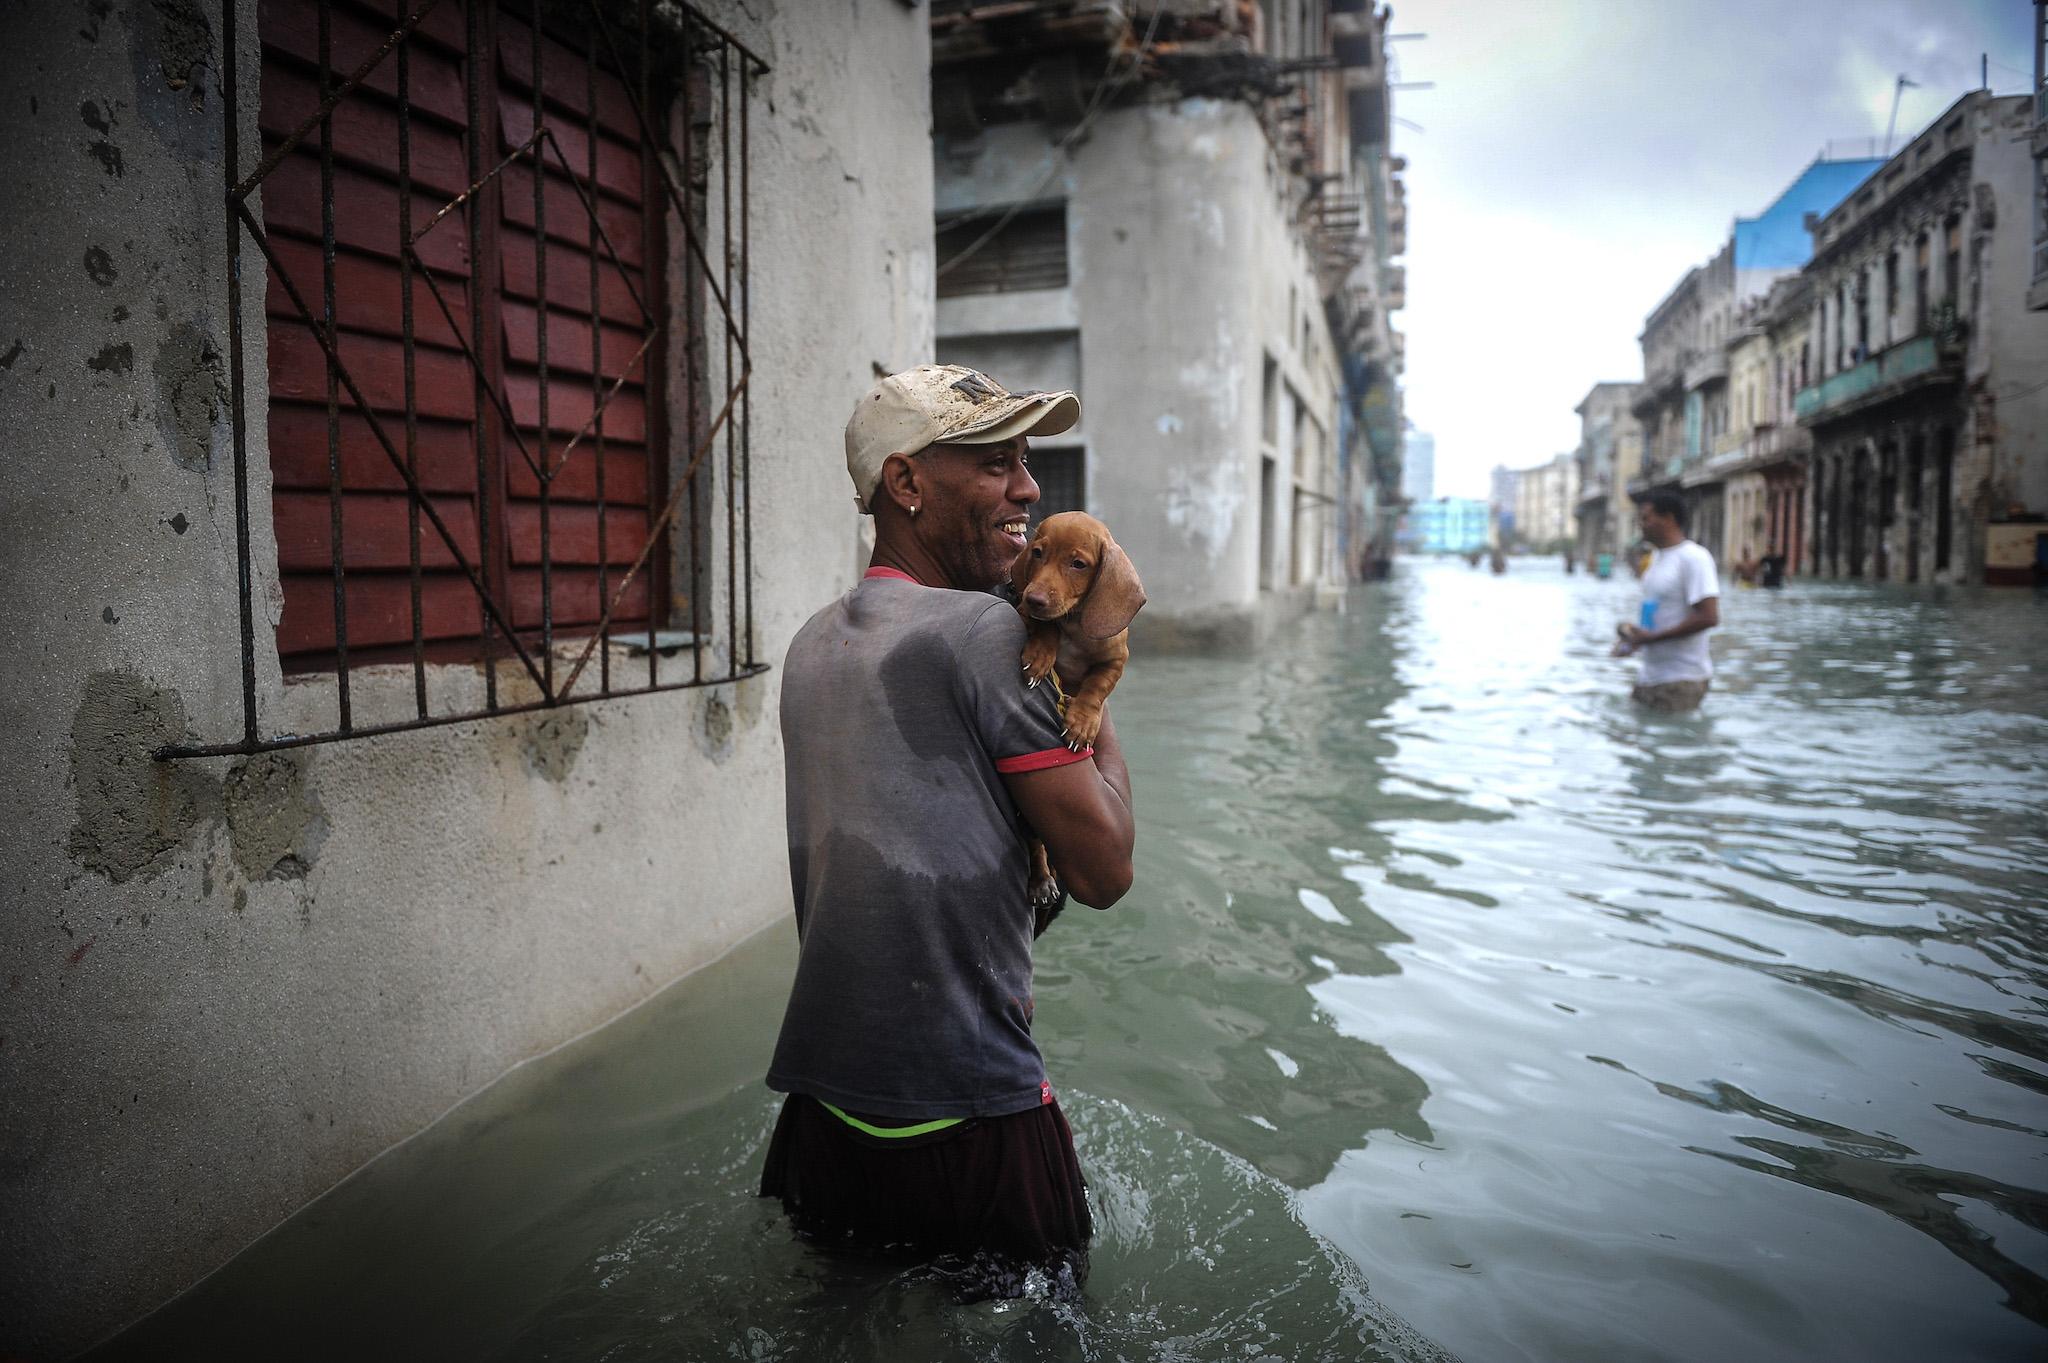 A Cuban carrying his pet wades through a flooded street in Havana, on September 10, 2017